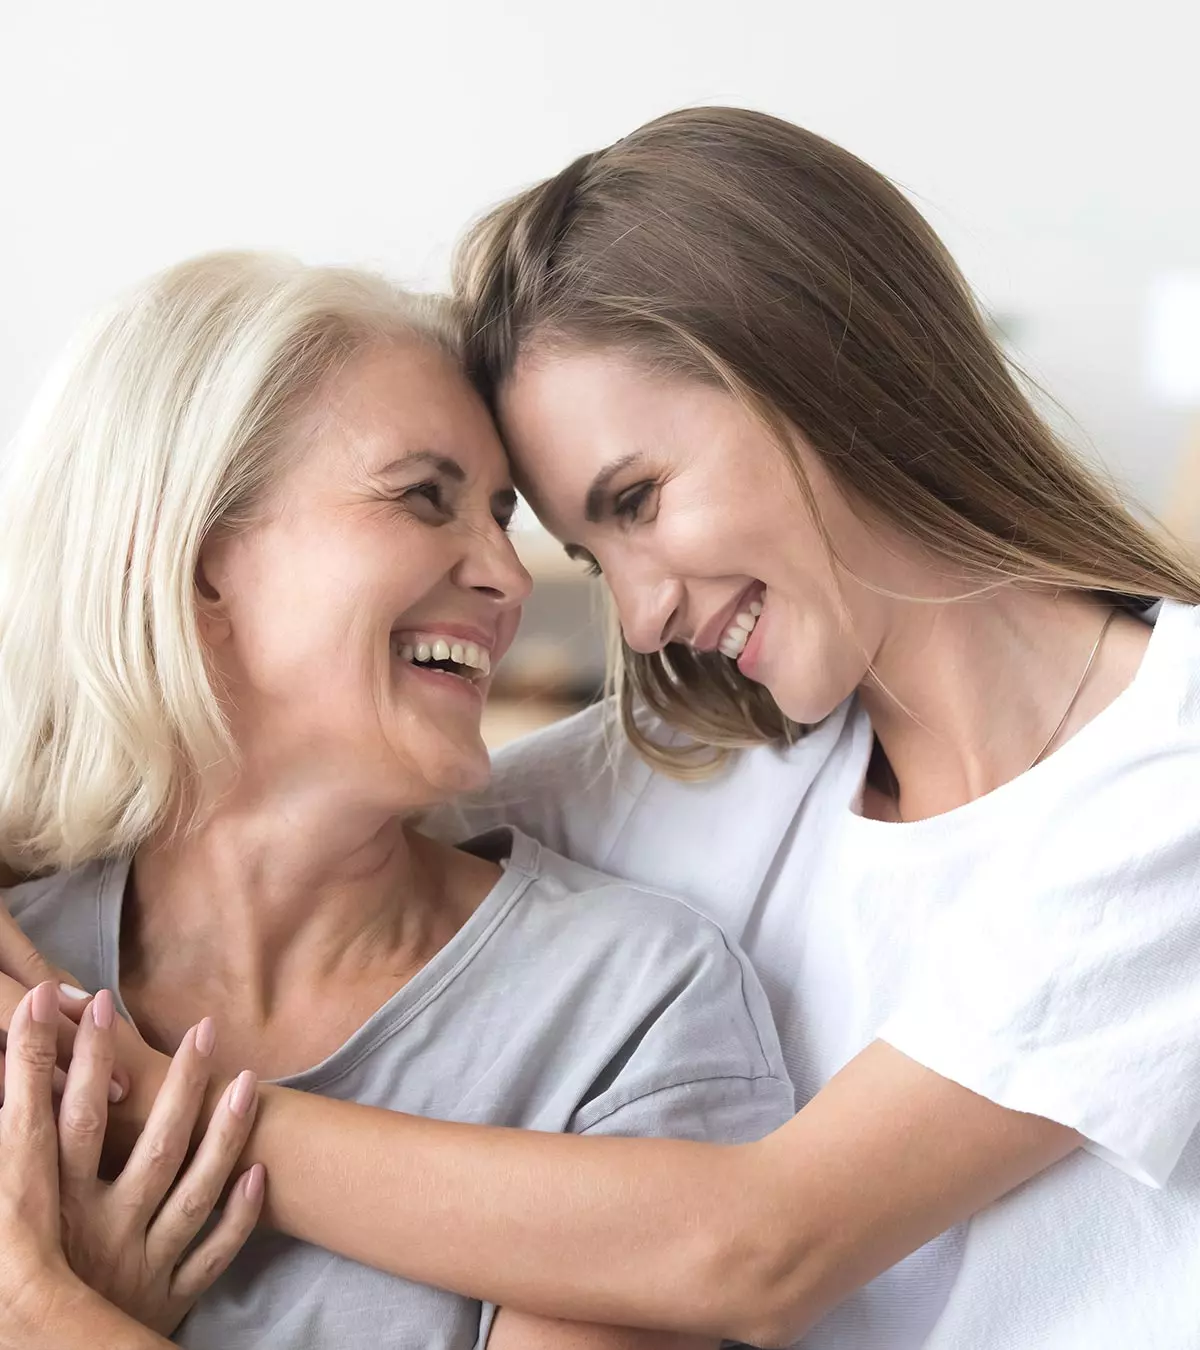 Mother-daughter Relationship Importance And Ways To Improve